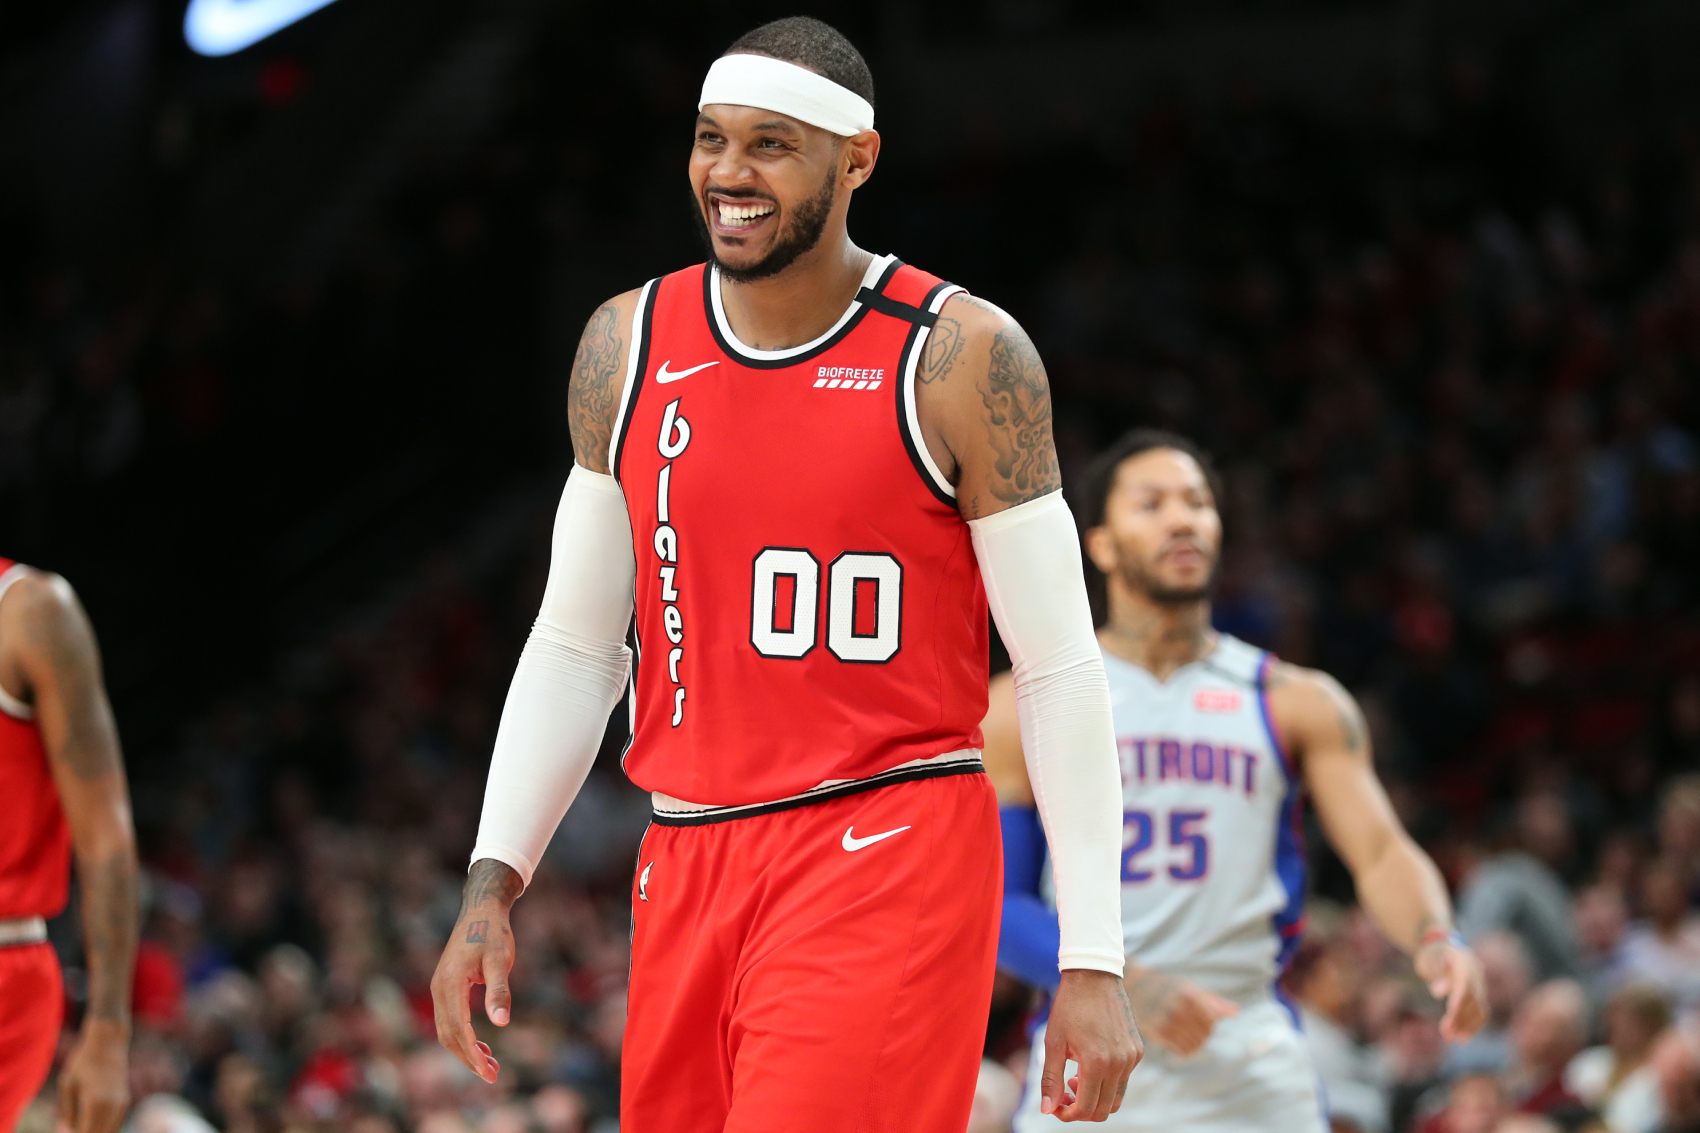 Carmelo Anthony proved that he is still an effective NBA player with the Portland Trail Blazers. So, where will Anthony go next?